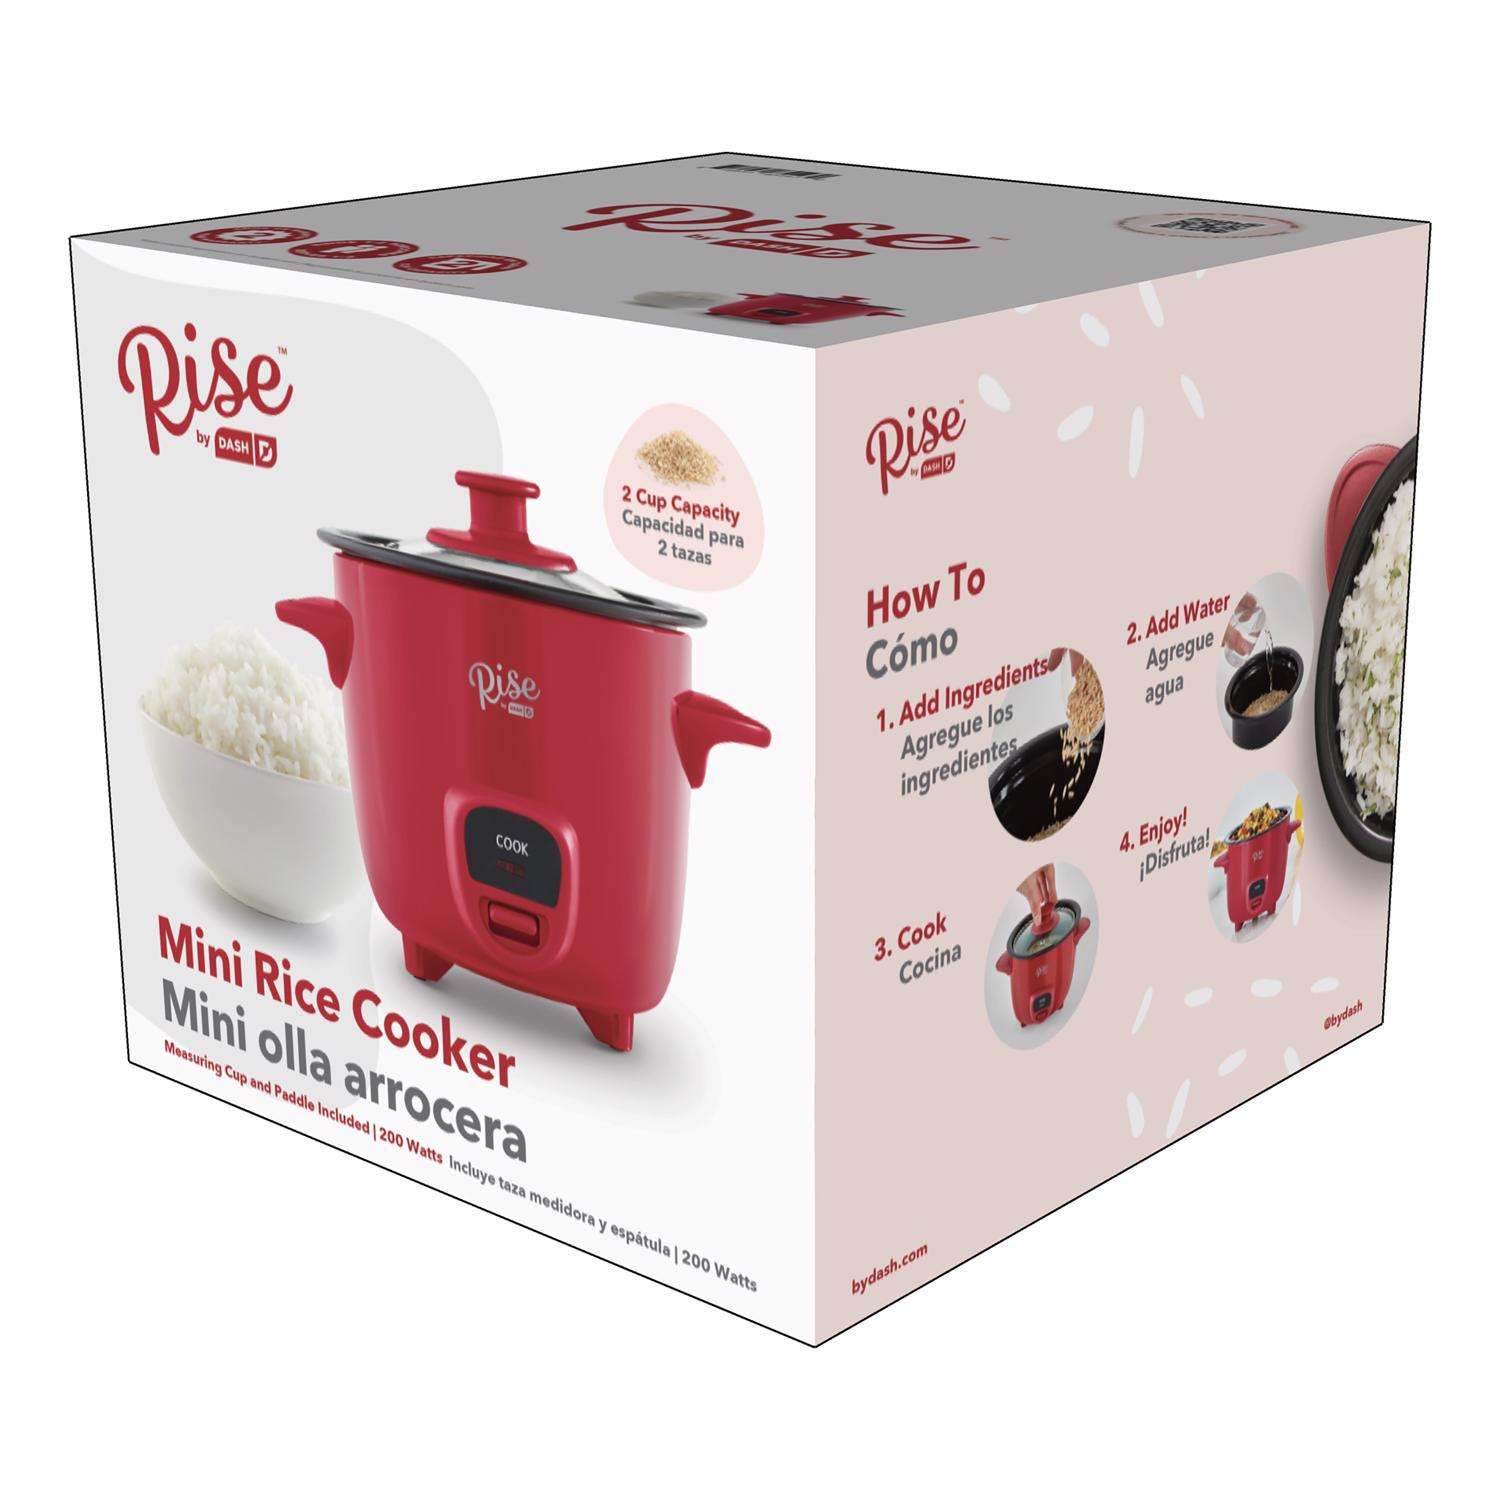 Rise by Dash Rice Cooker 2 Cup, Red